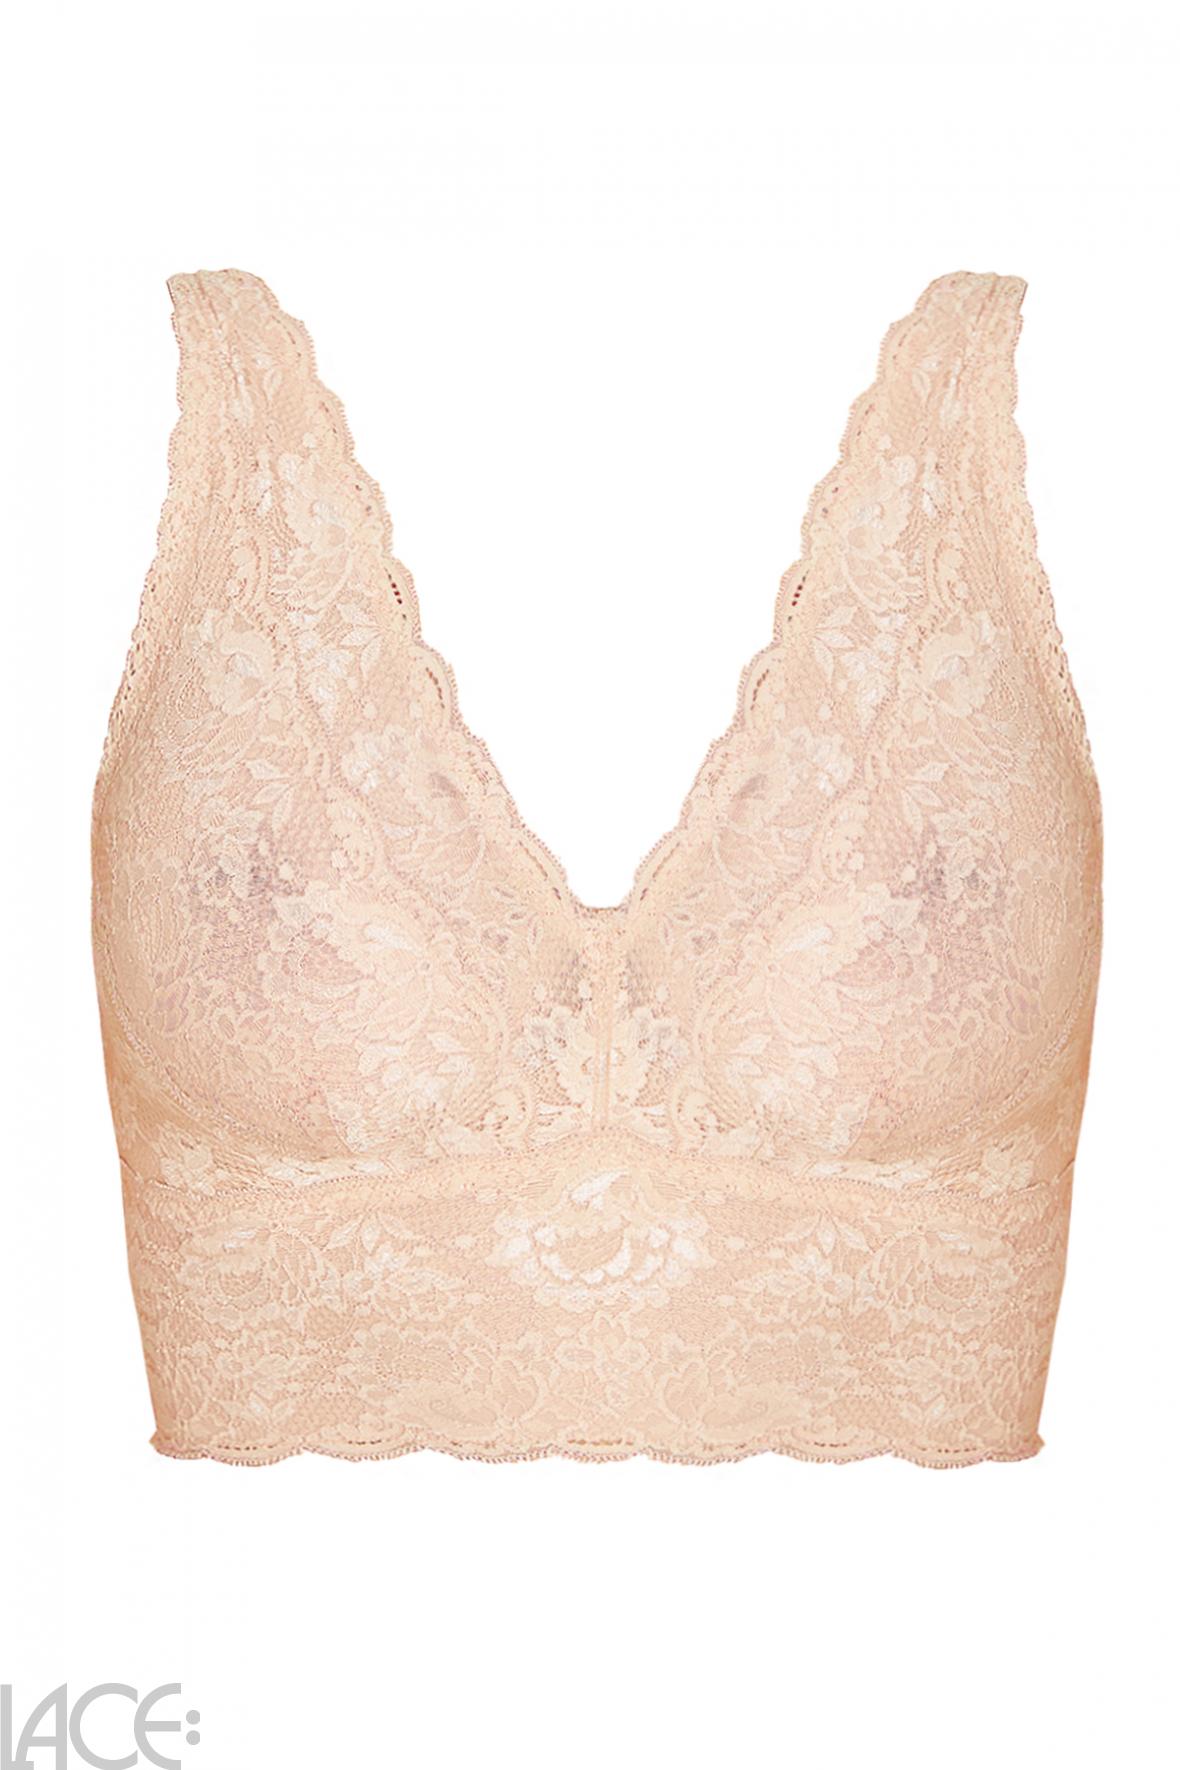  Bra - Wireless - Cosabella - Curvy Plungie Bralette  without wire E-I Cup